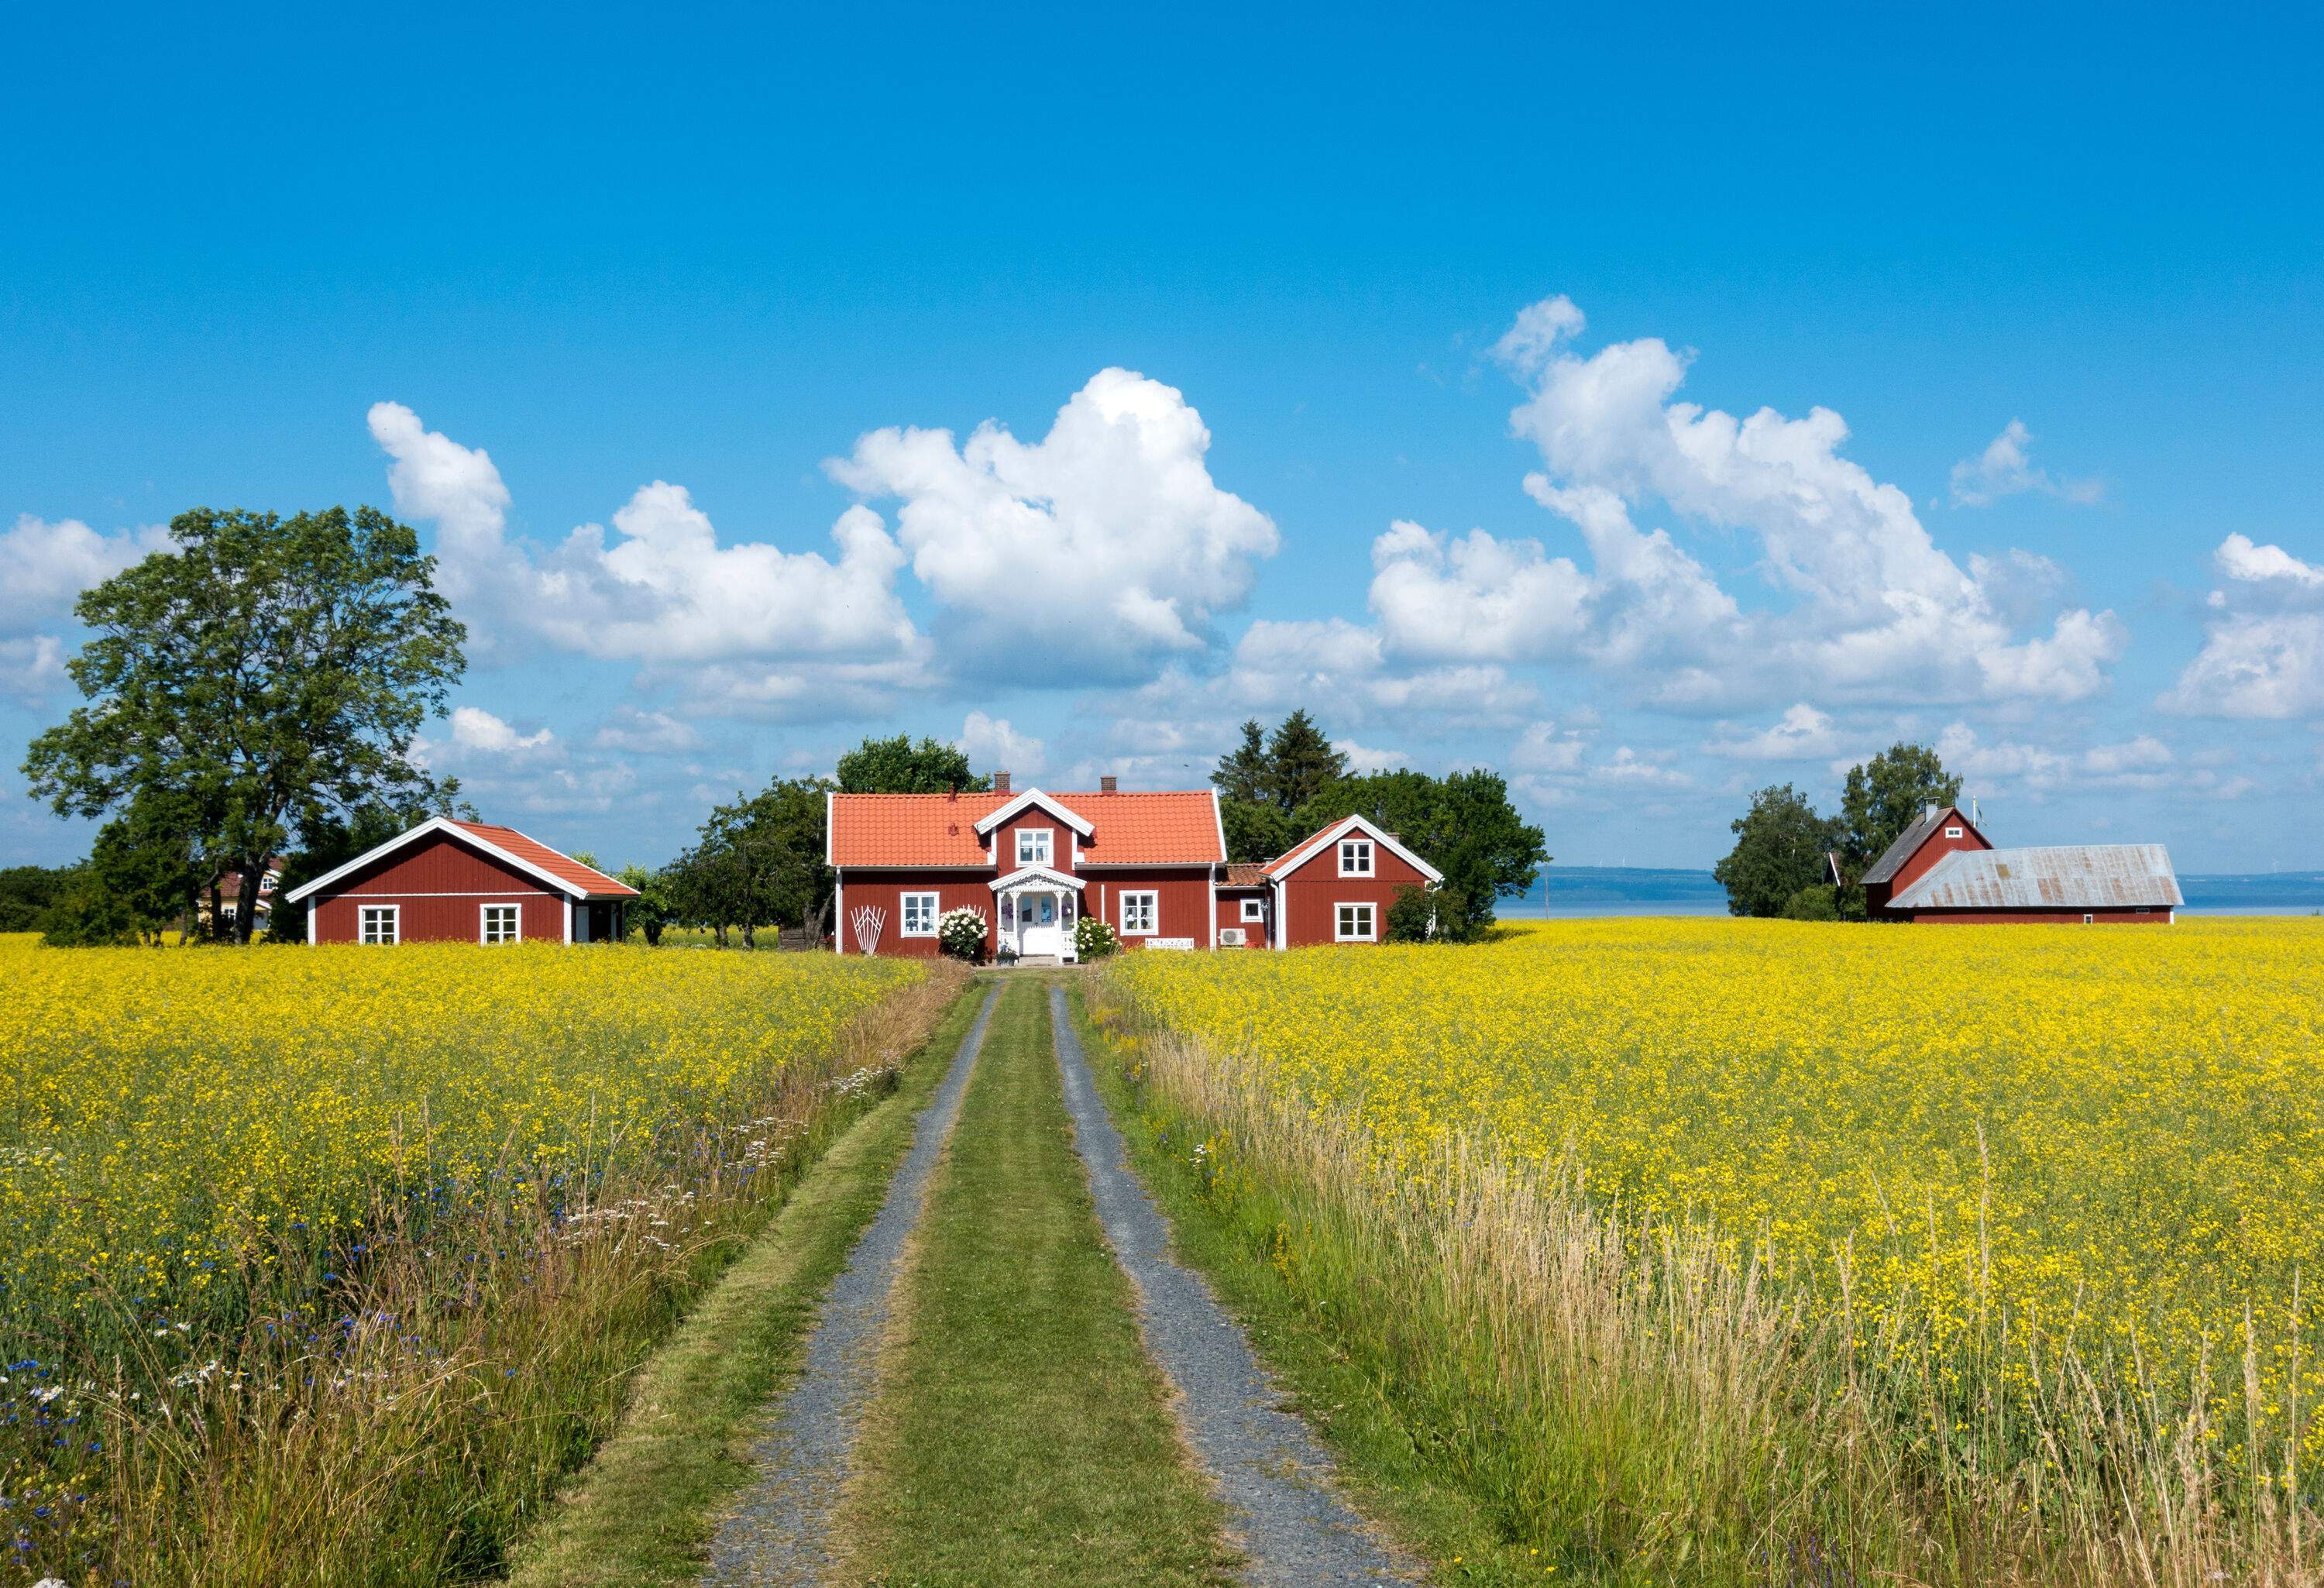 A dirt road in a yellow-flowered meadow leads to a traditional red farmhouse with white doors and windows.